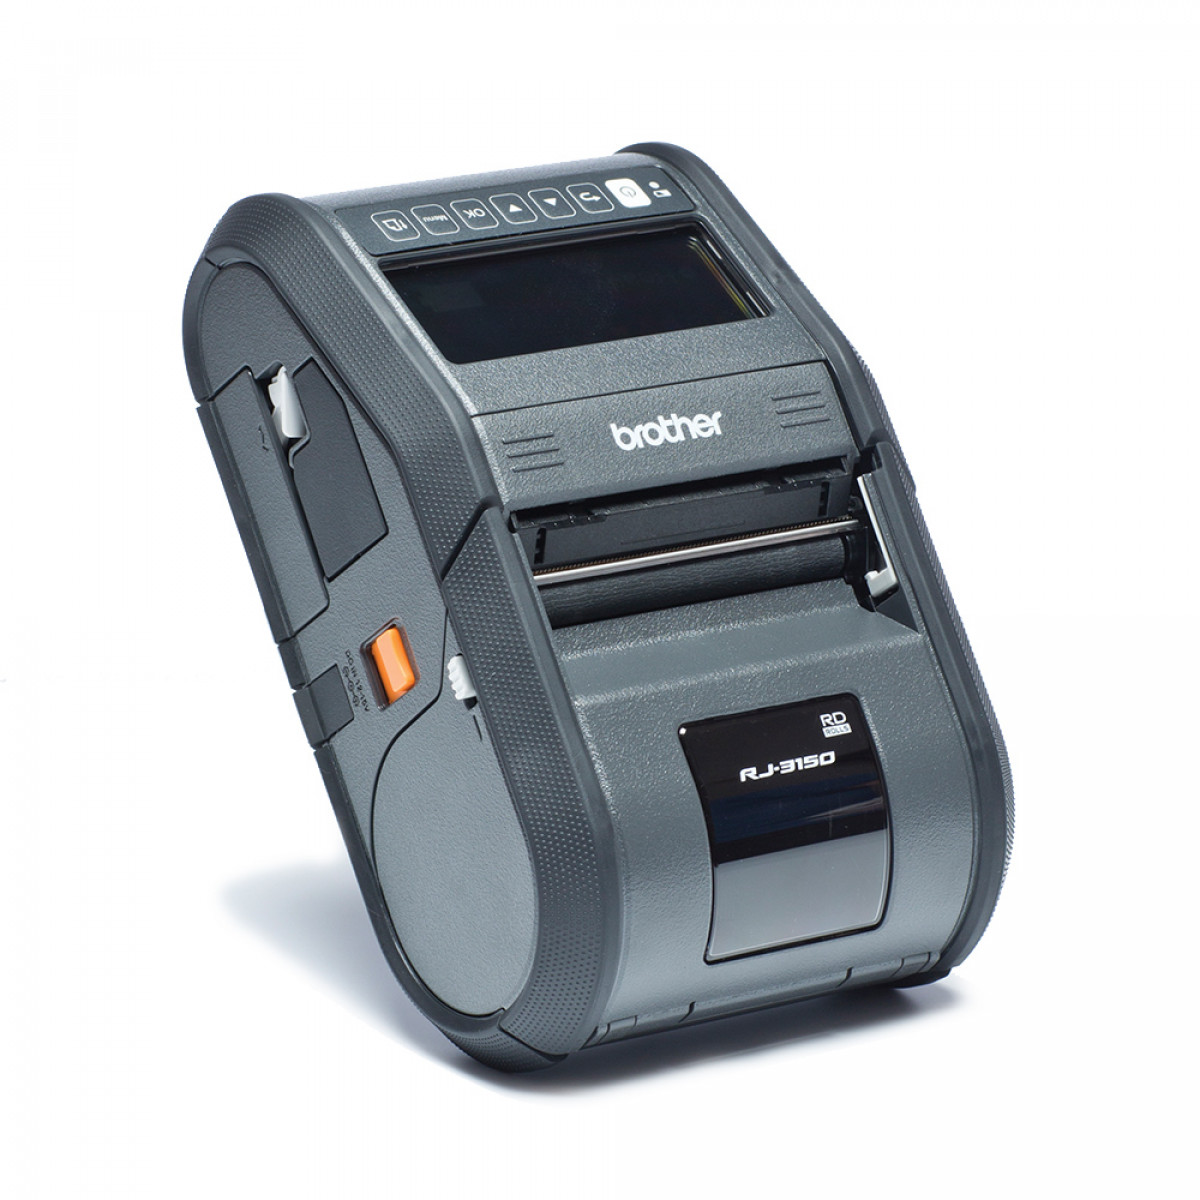 Brother RJ-3150 2 and 3 inch portable label printer